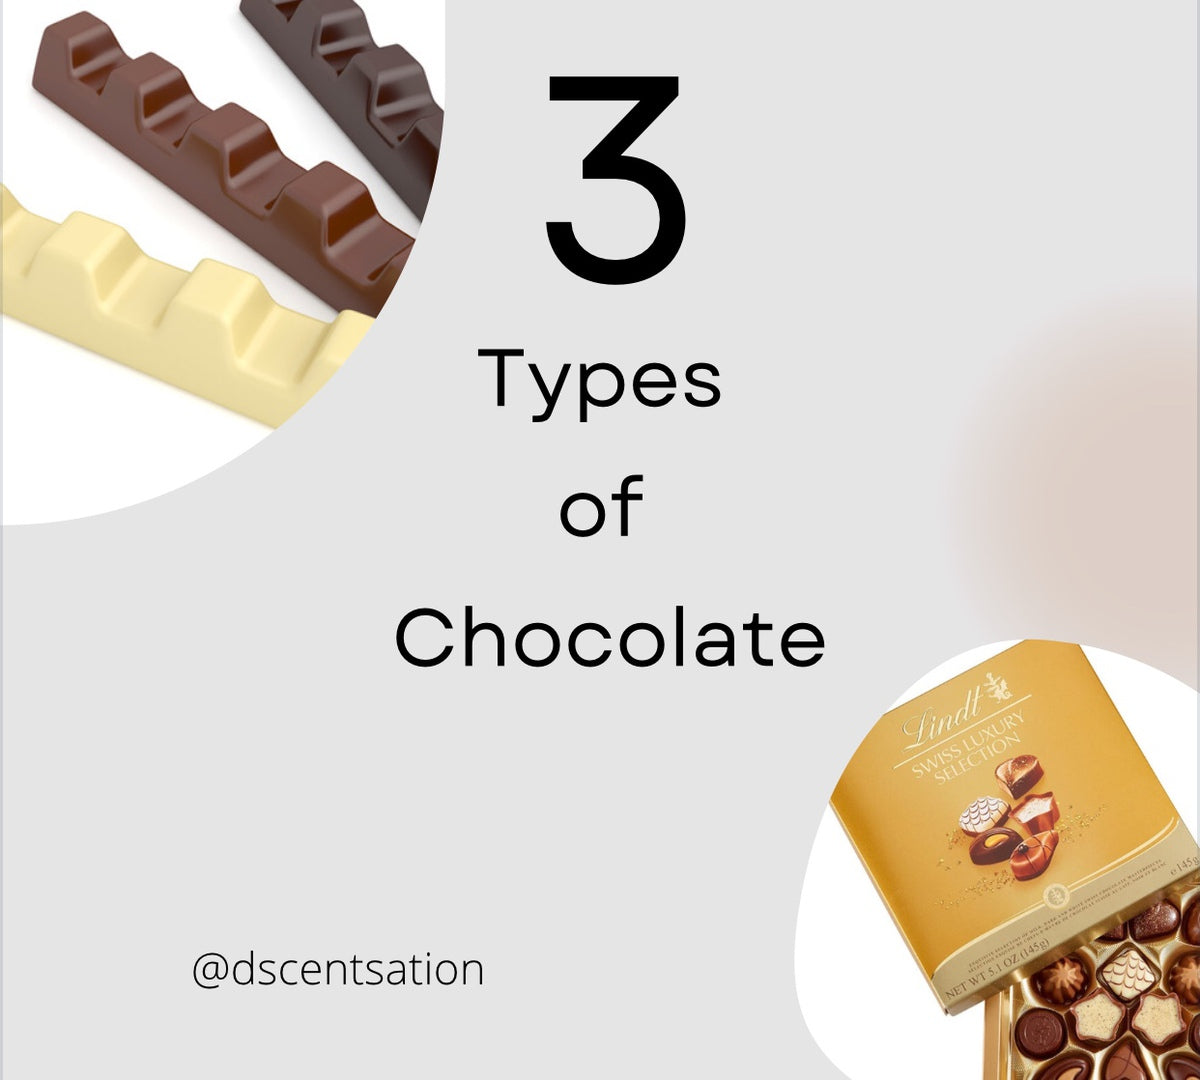 Types of chocolate and their uniqueness